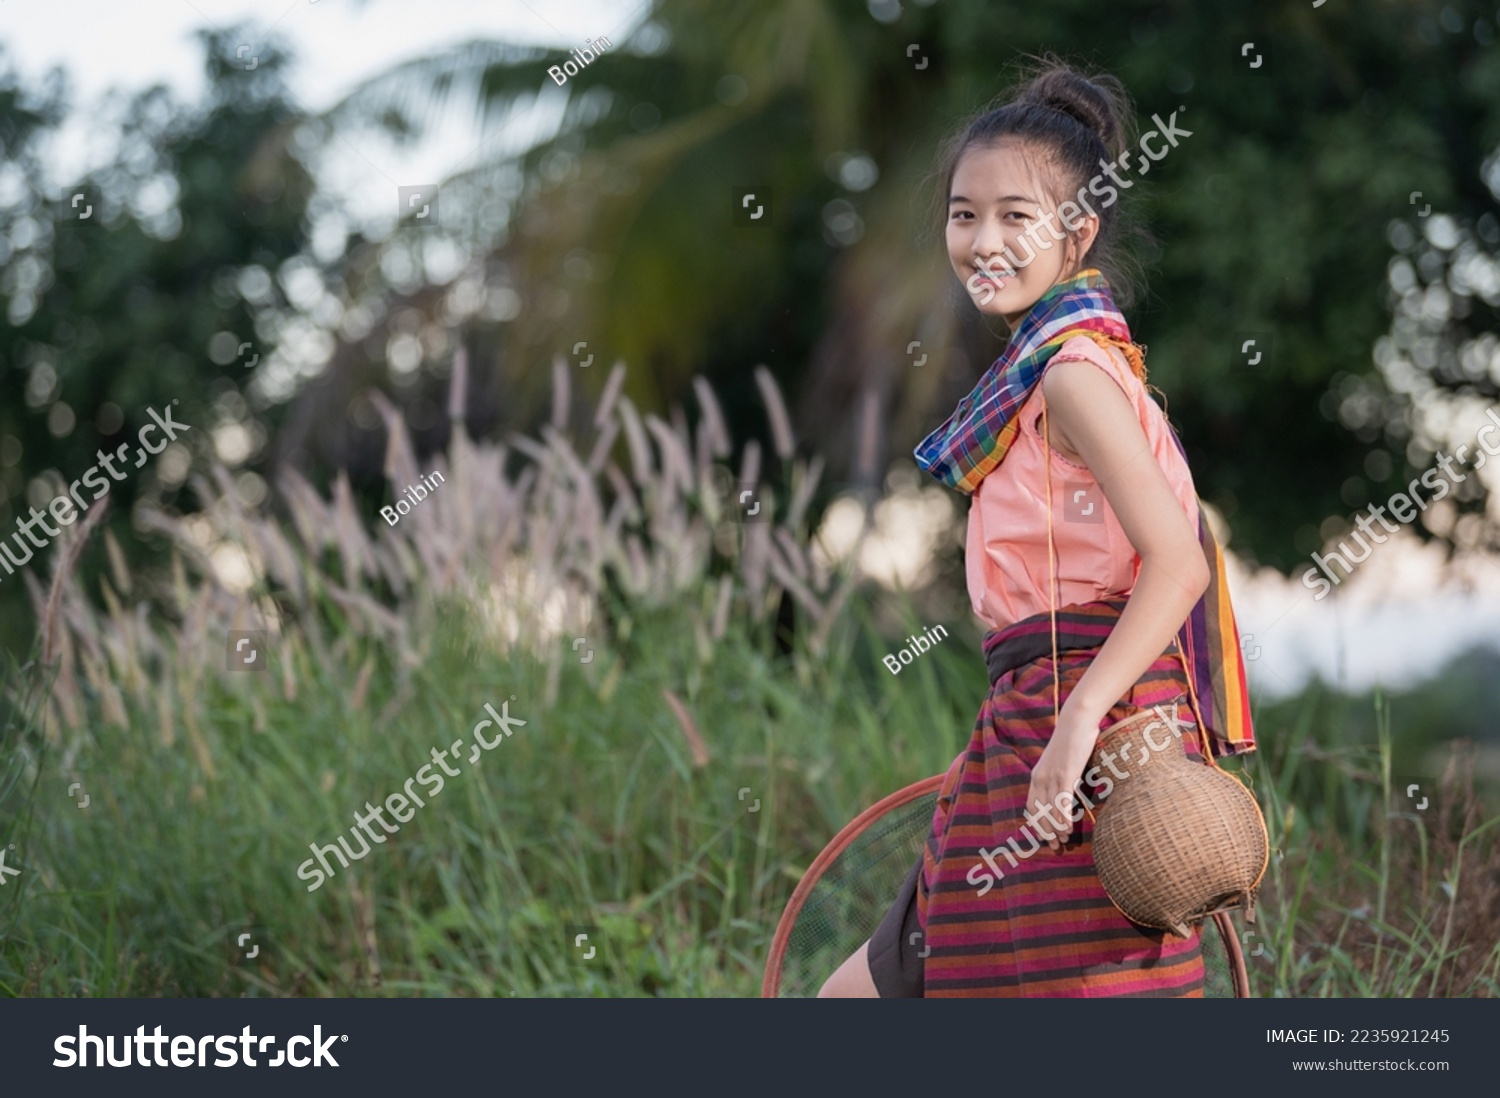 A young Asian farmer girl (with braces) smiling cheerfully as she prepares to fish in a pond beside the rice field. #2235921245